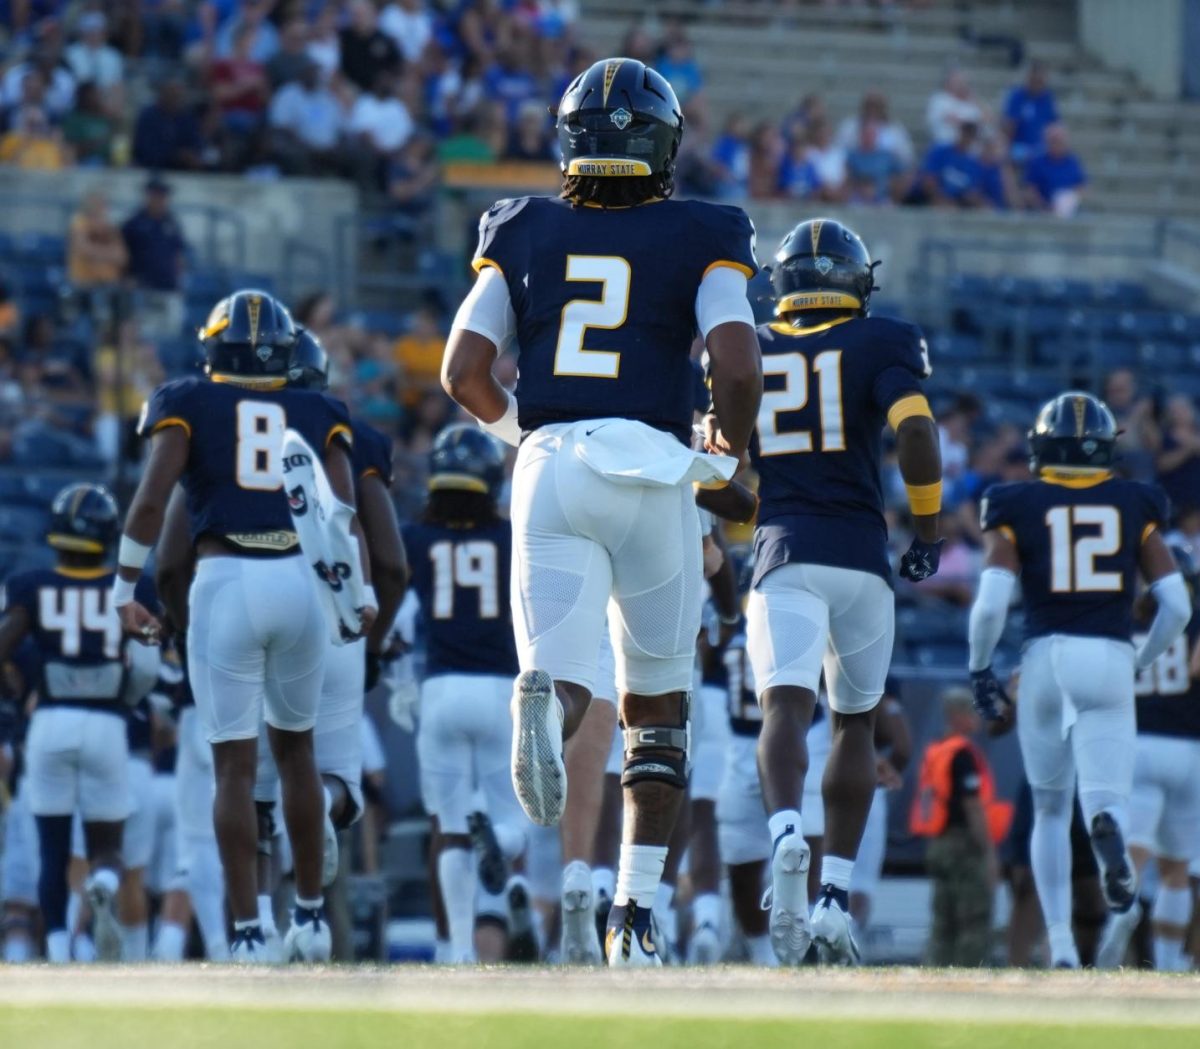 Sophomore quarterback DJ Williams (center) runs out for the Racers first game against Presbyterian College.